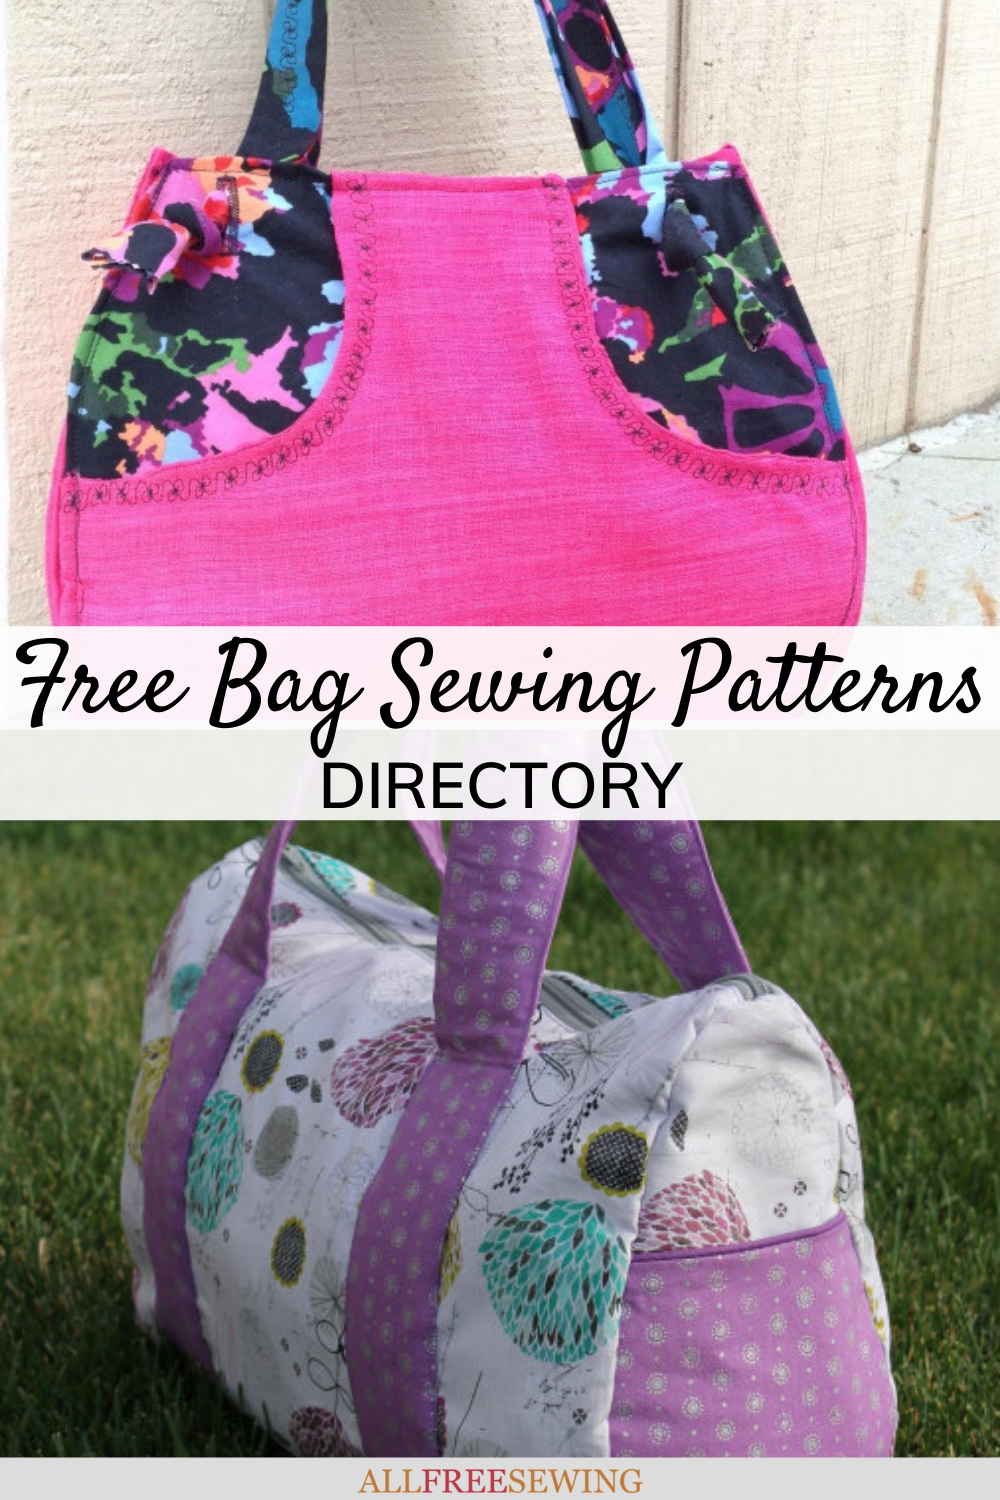 Free Bag Sewing Patterns Directory | AllFreeSewing.com